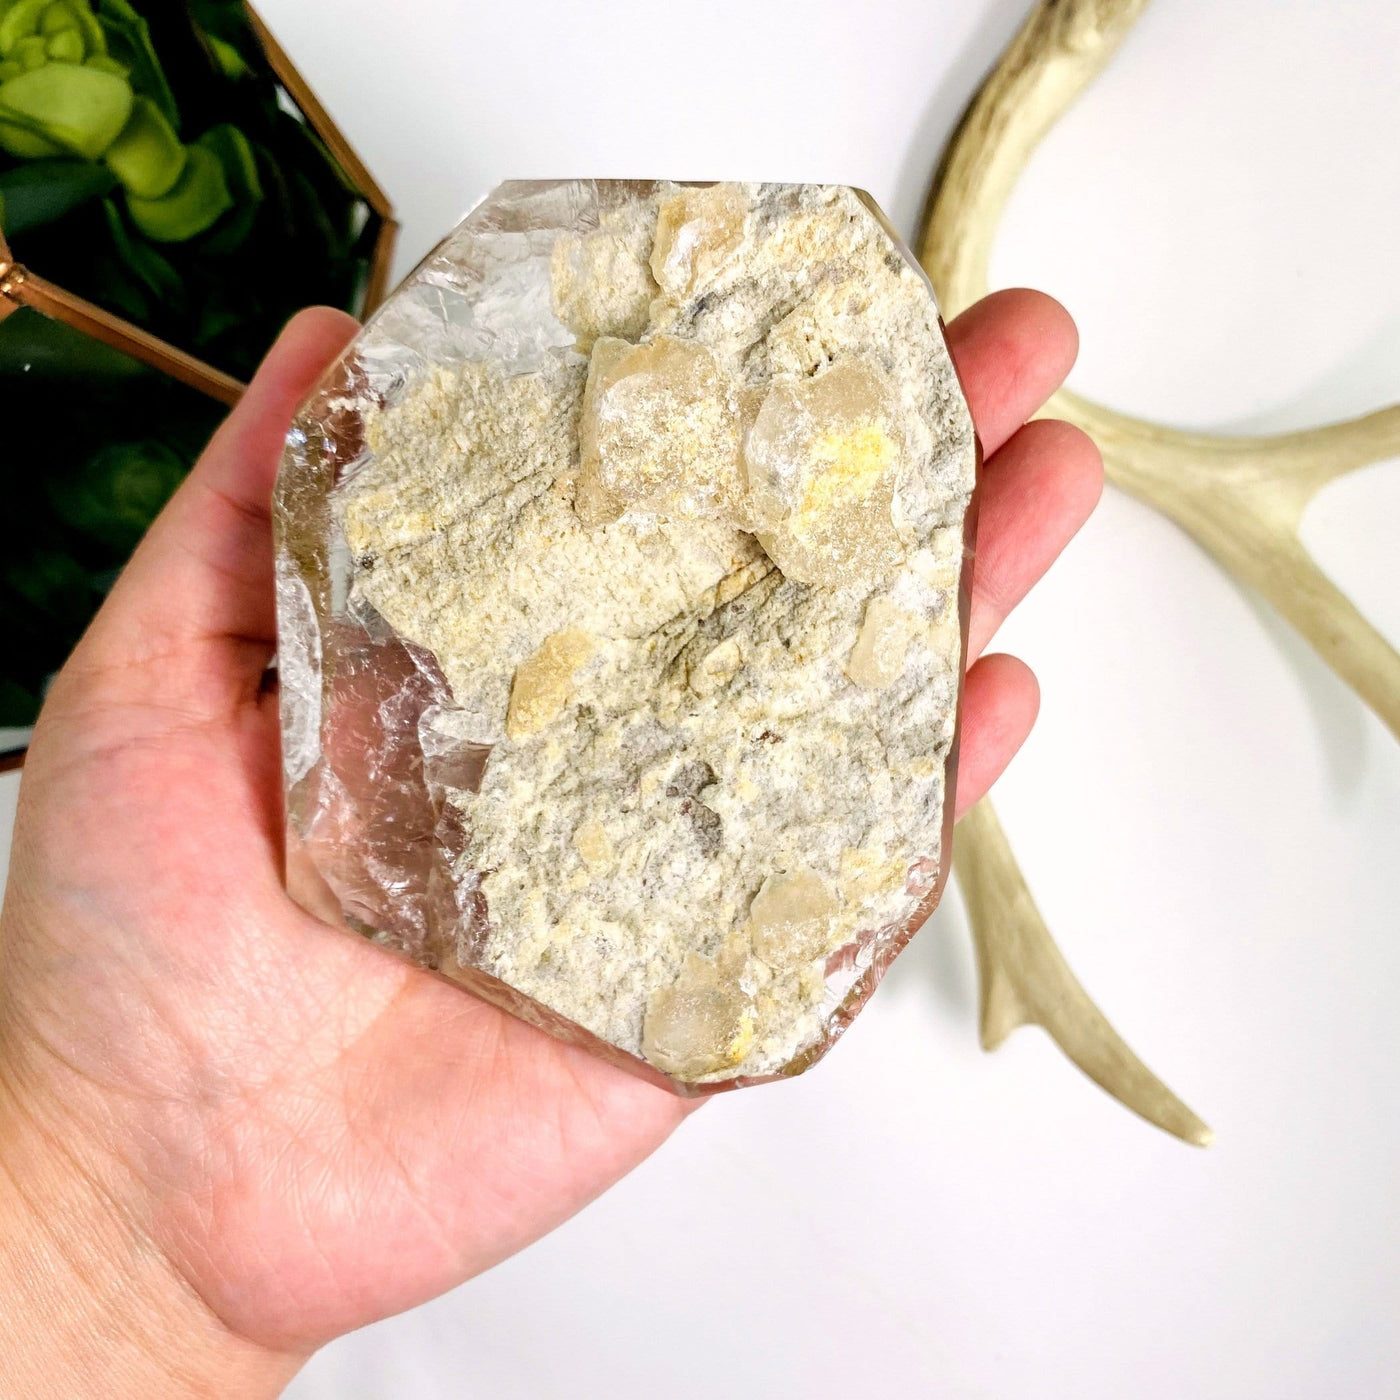 hand holding up Crystal Quartz Polished Stone with decorations in the background